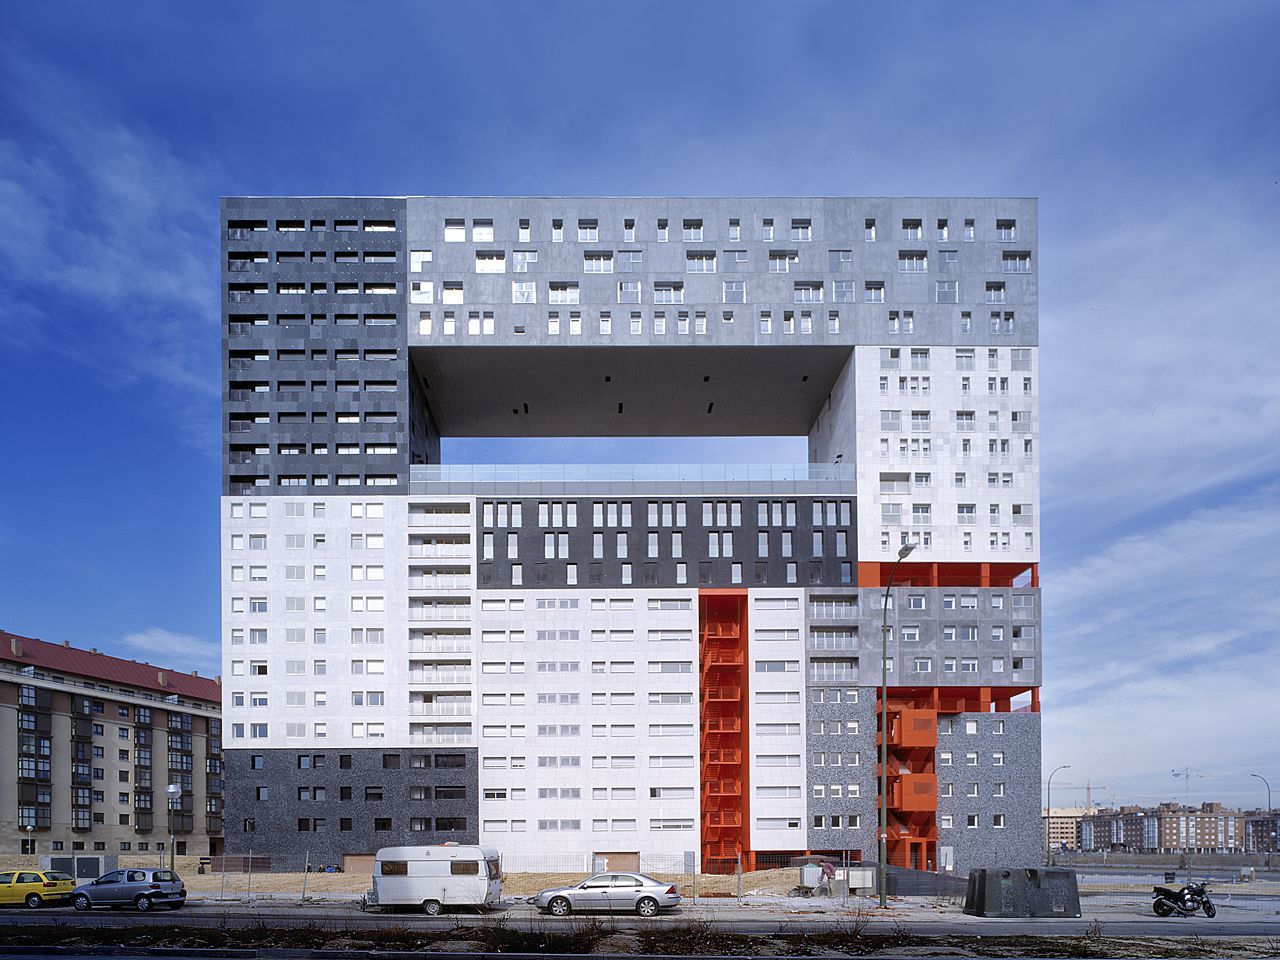 Architectural firm MVRDV did not run out of money before completing <a href="http://www.mvrdv.nl/projects/mirador/" target="_blank" target="_blank">The Mirador</a> apartment complex in Madrid. The hole in the middle is actually a semi-public sky plaza which provides an ideal vantage point to enjoy the nearby Guadarrama Mountains. It also includes a community garden, thereby "monumentalizing public life and space." 